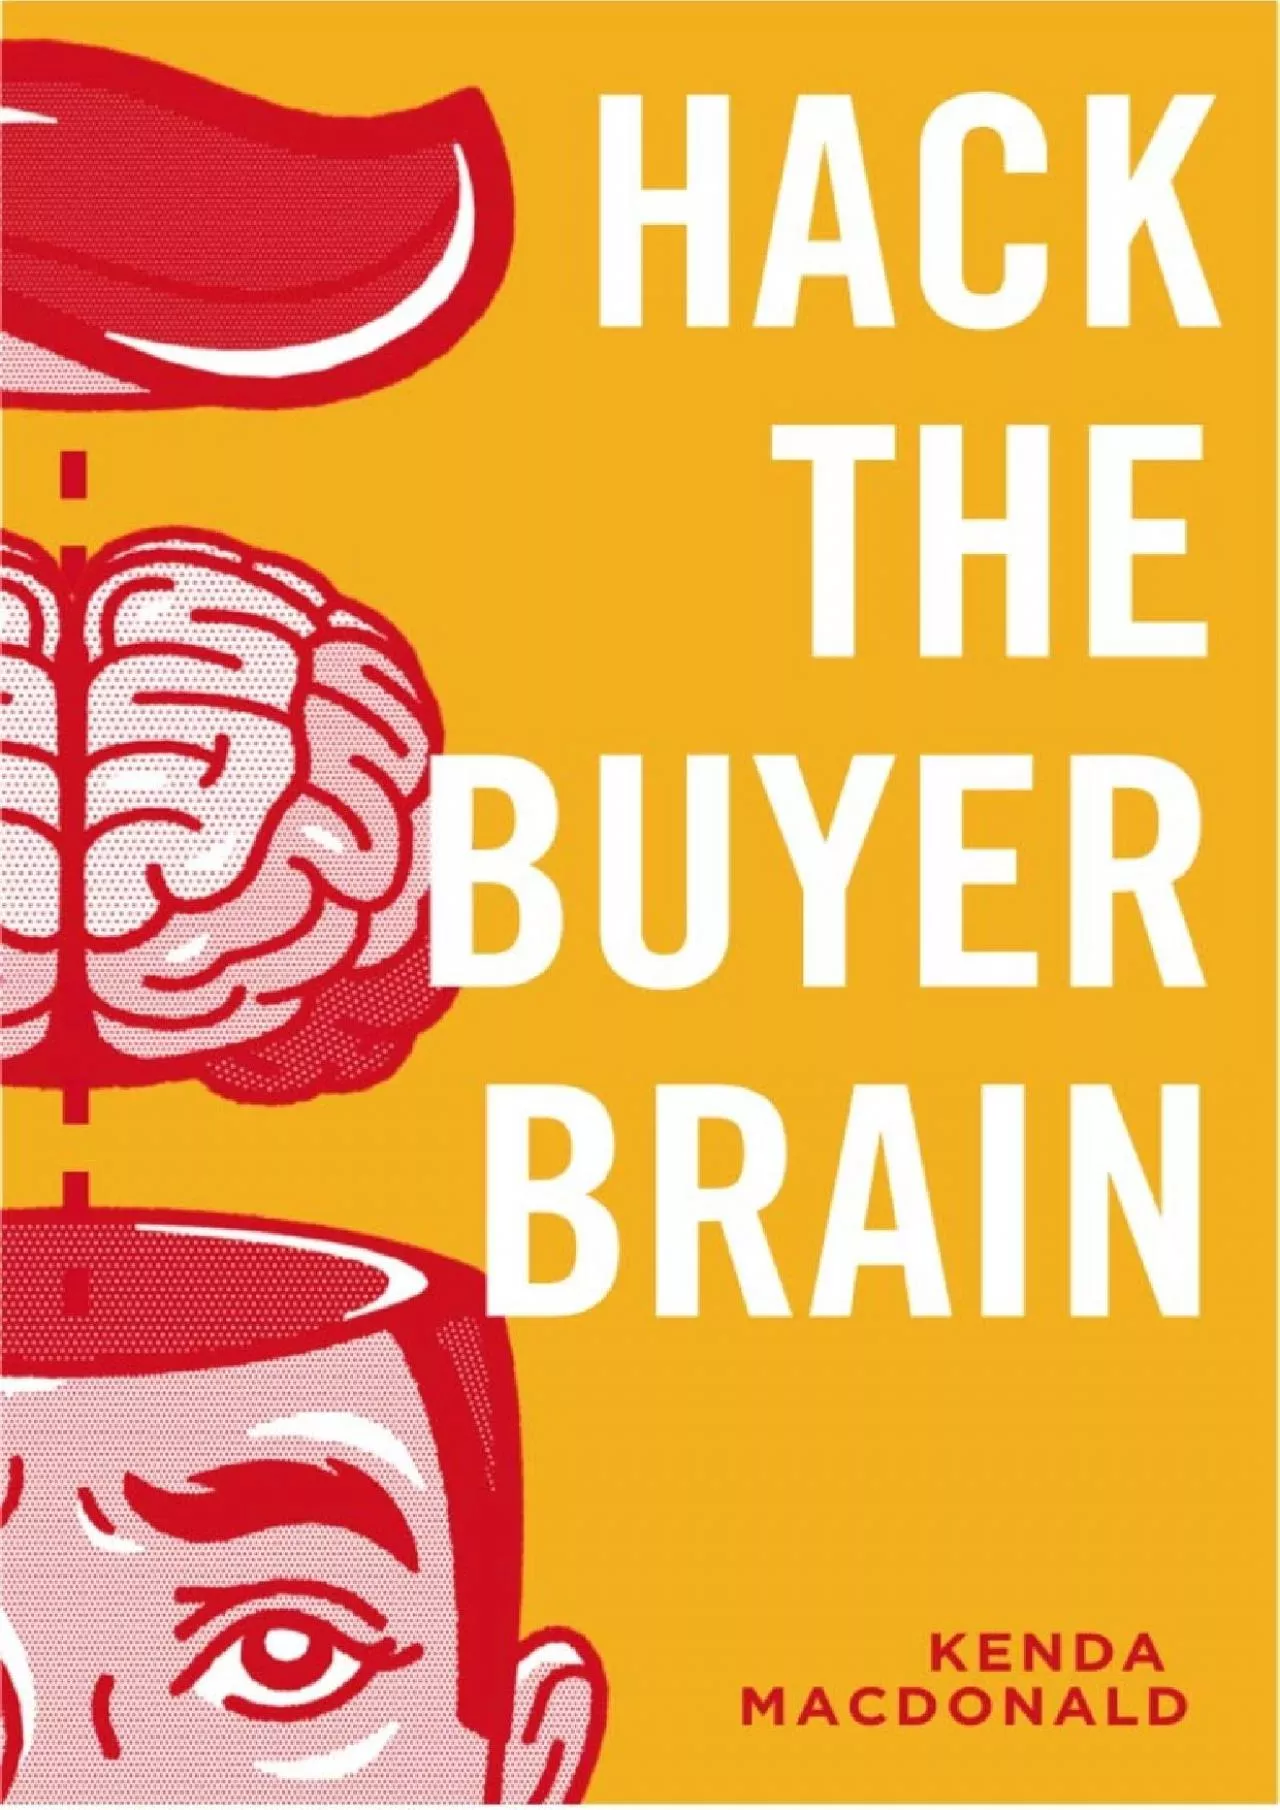 Hack The Buyer Brain A Revolutionary Approach To Sales, Marketing, And Creating A Profitable